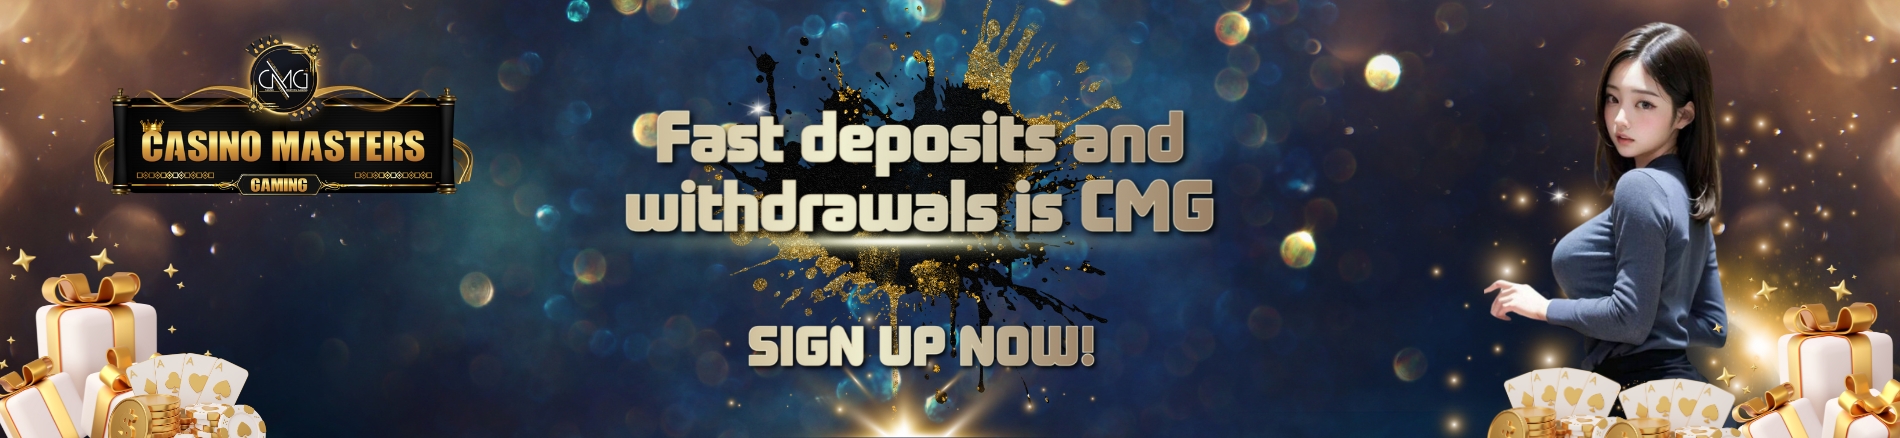 fast-deposit-and-withdrawals_banner